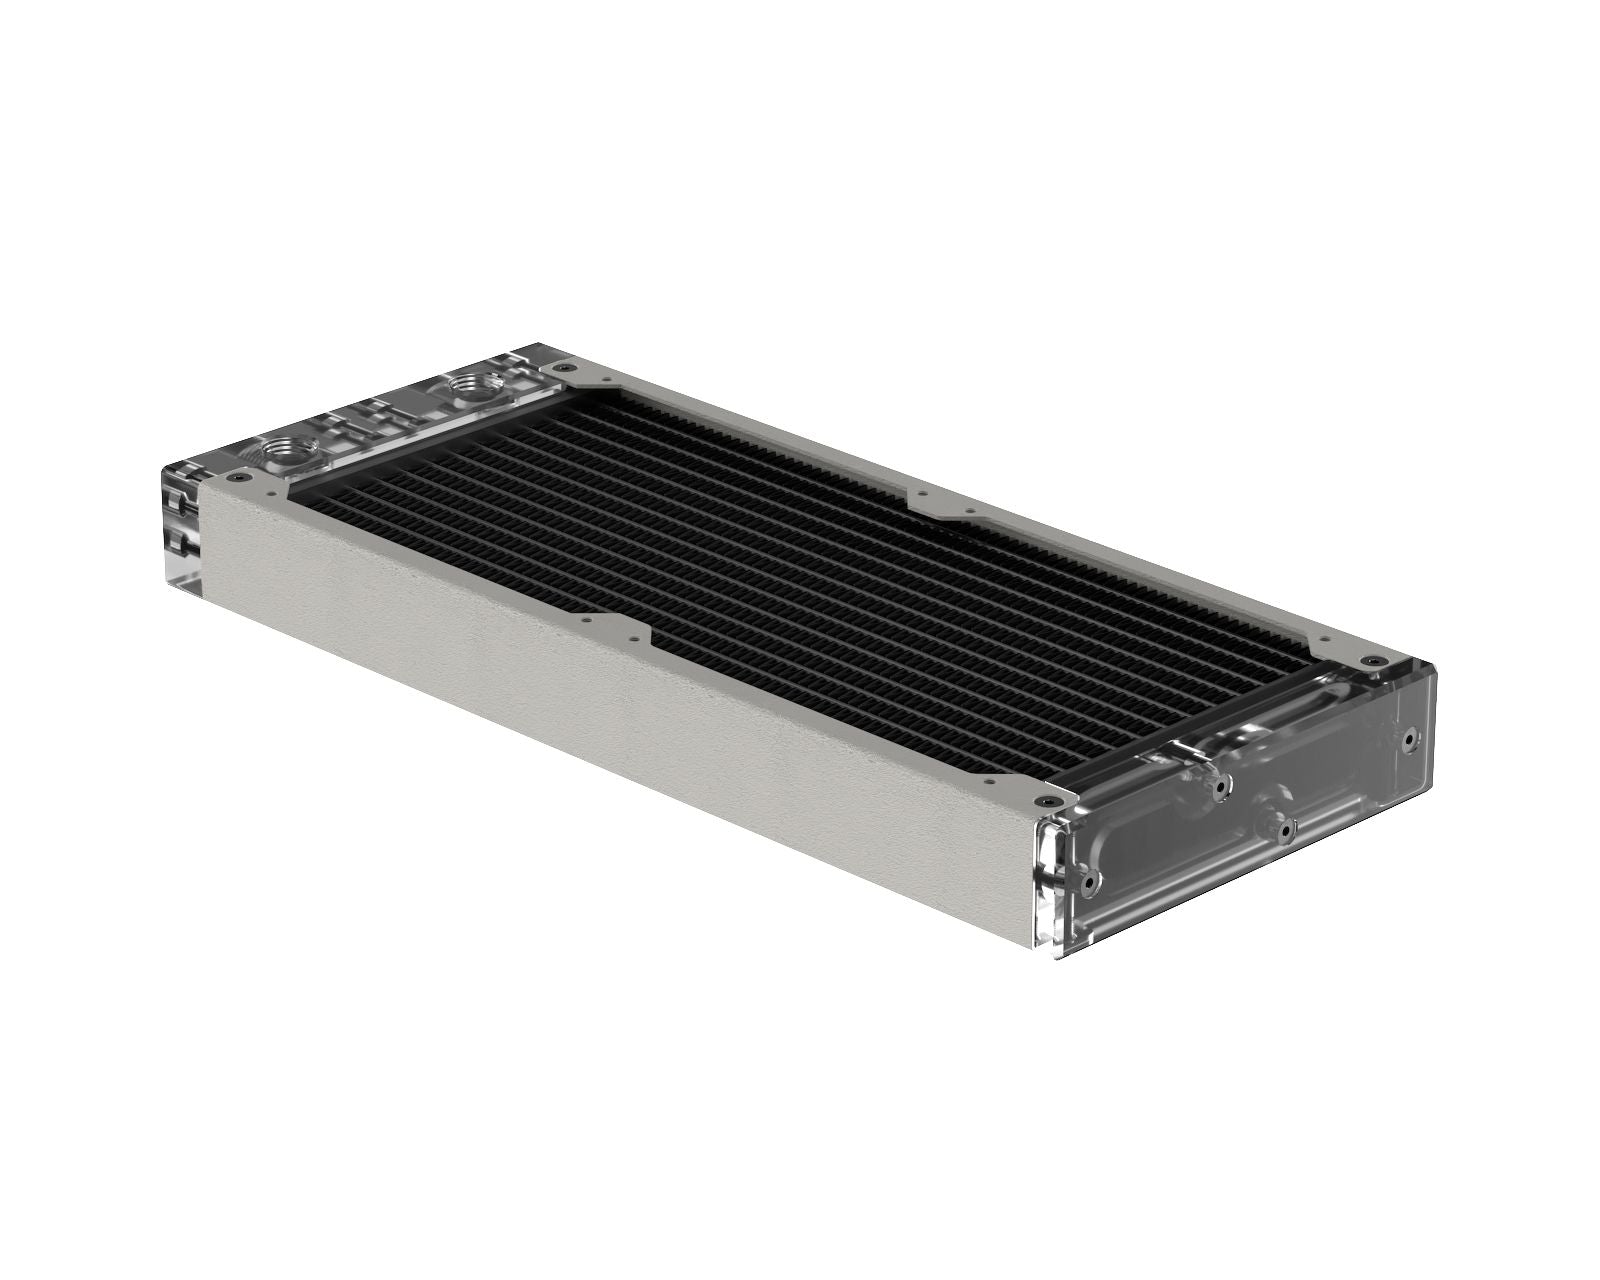 PrimoChill 240SL (30mm) EXIMO Modular Radiator, Clear Acrylic, 2x120mm, Dual Fan (R-SL-A24) Available in 20+ Colors, Assembled in USA and Custom Watercooling Loop Ready - TX Matte Silver